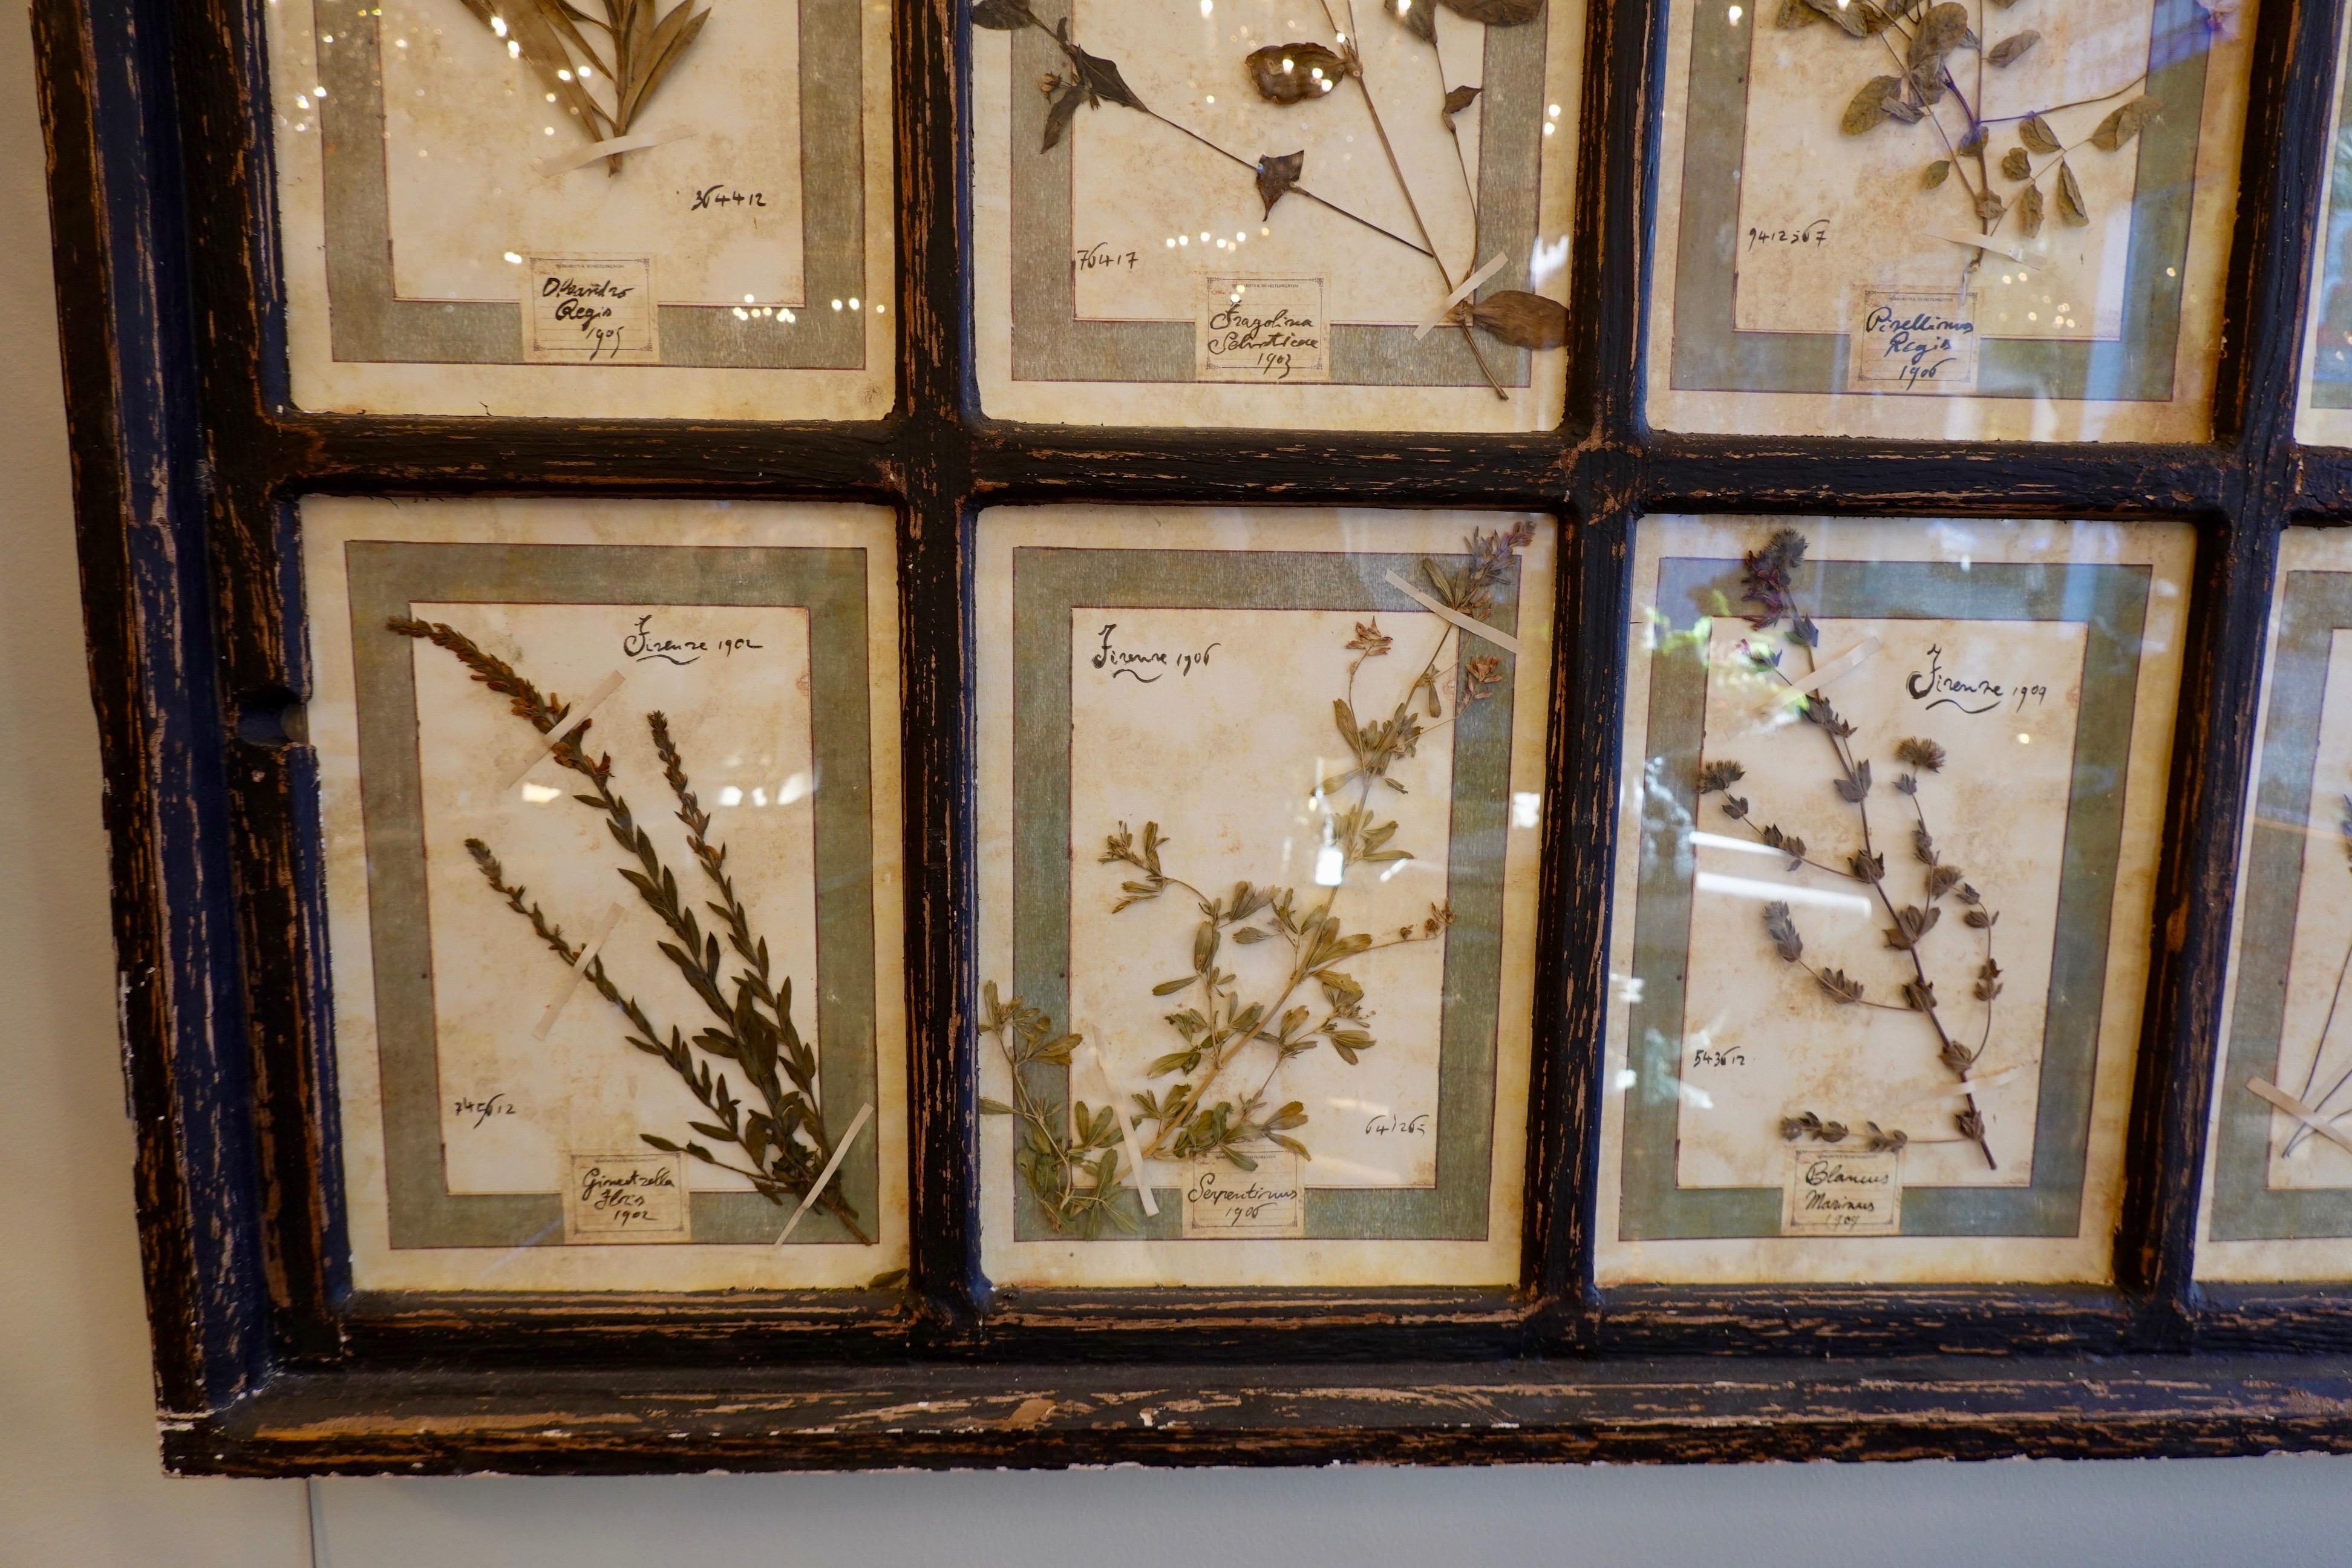 Collection of 16 Italian Herbiers Set in Large Paned Window Frame 7